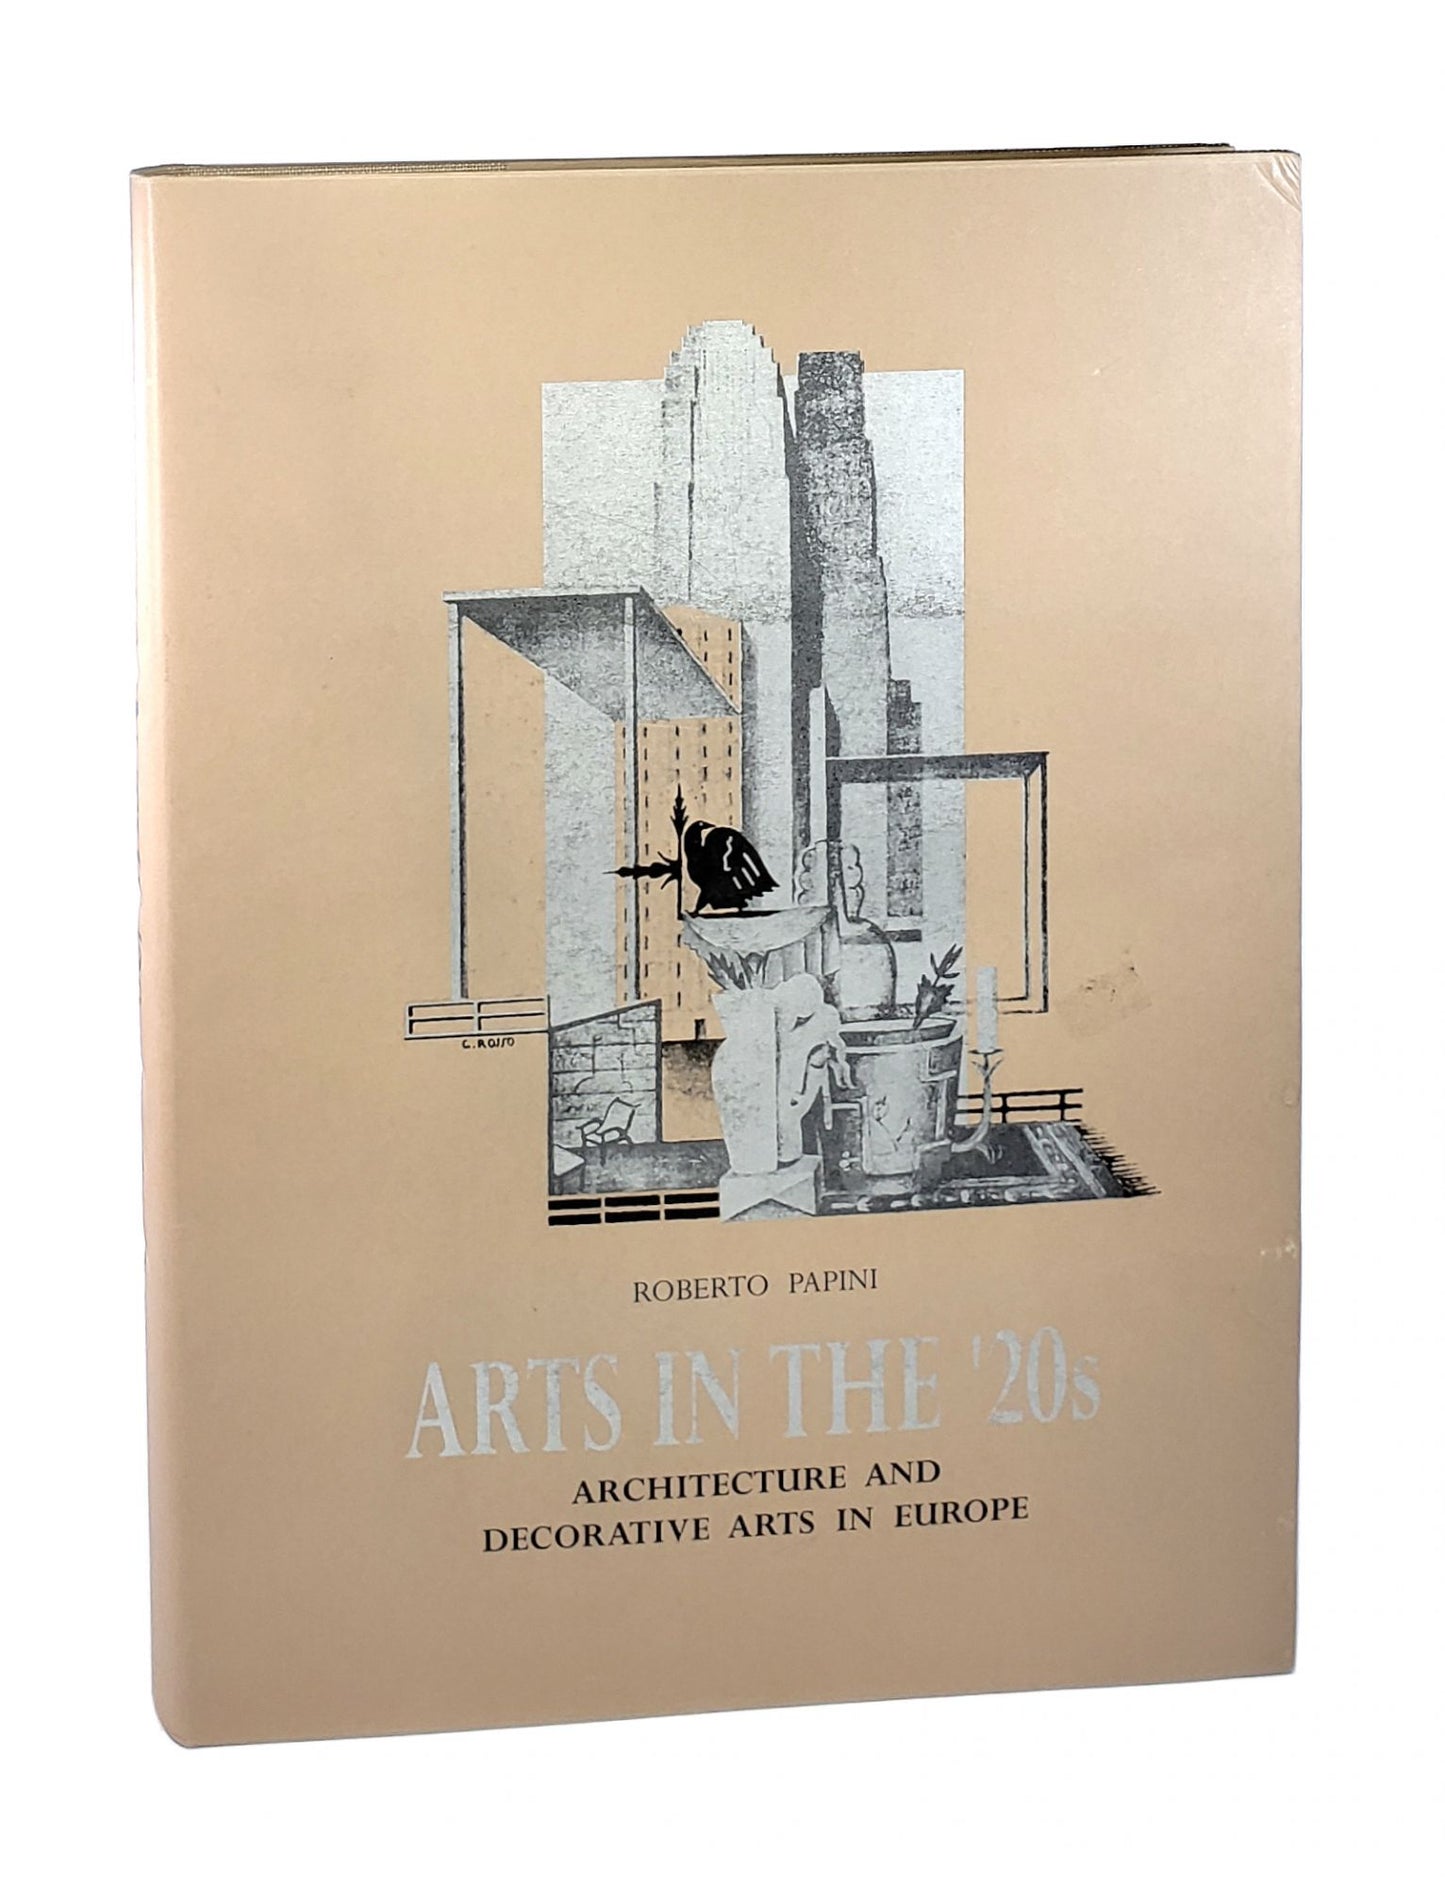 Arts in the 20's: Architecture and Decorative Arts in Europe by Roberto Papini